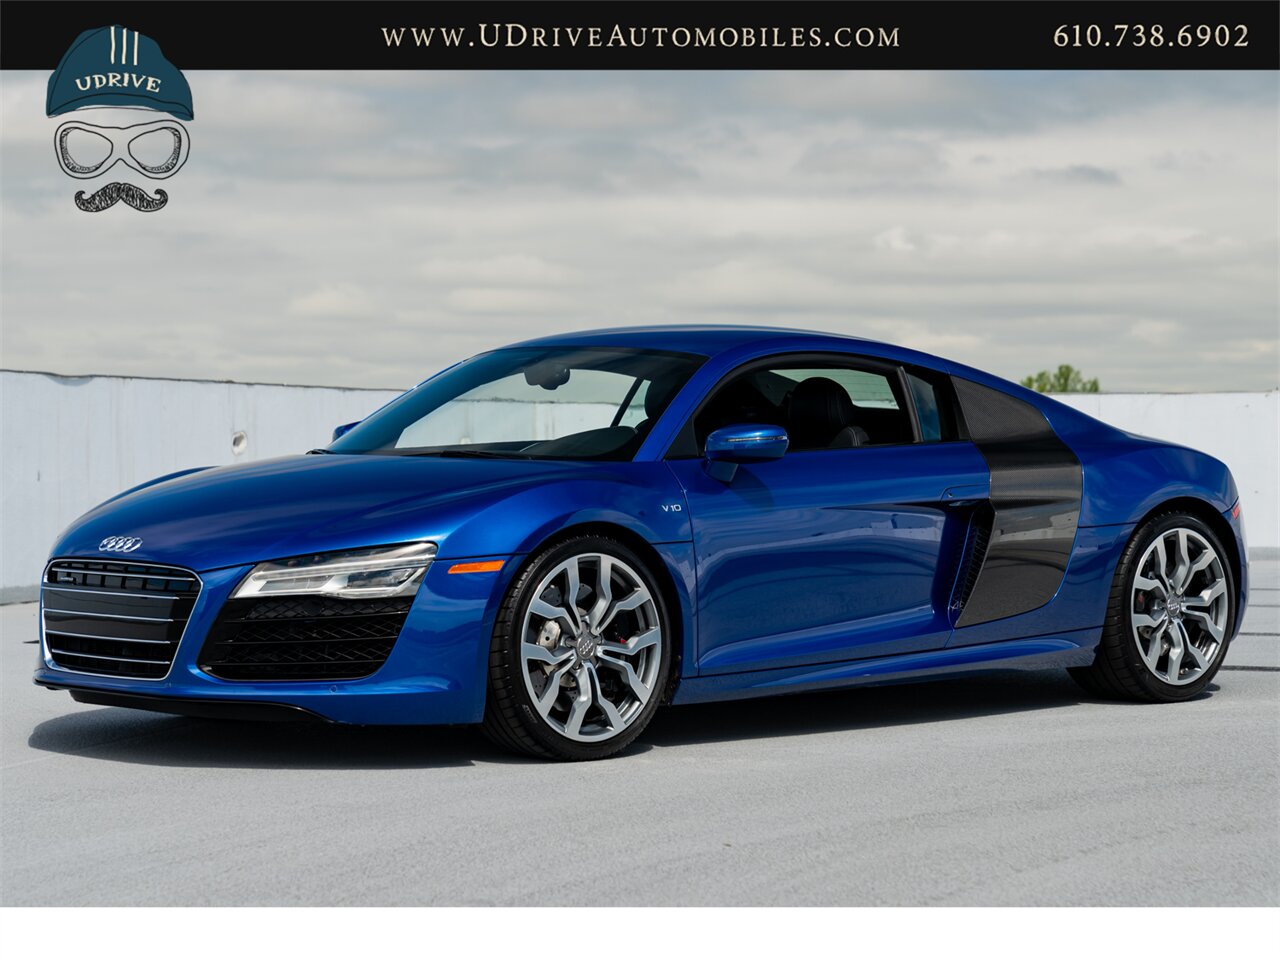 2015 Audi R8 5.2 V10 Quattro 6 Speed Manual 10k Miles  Diamond Stitched Leather 1 of 2 - Photo 10 - West Chester, PA 19382